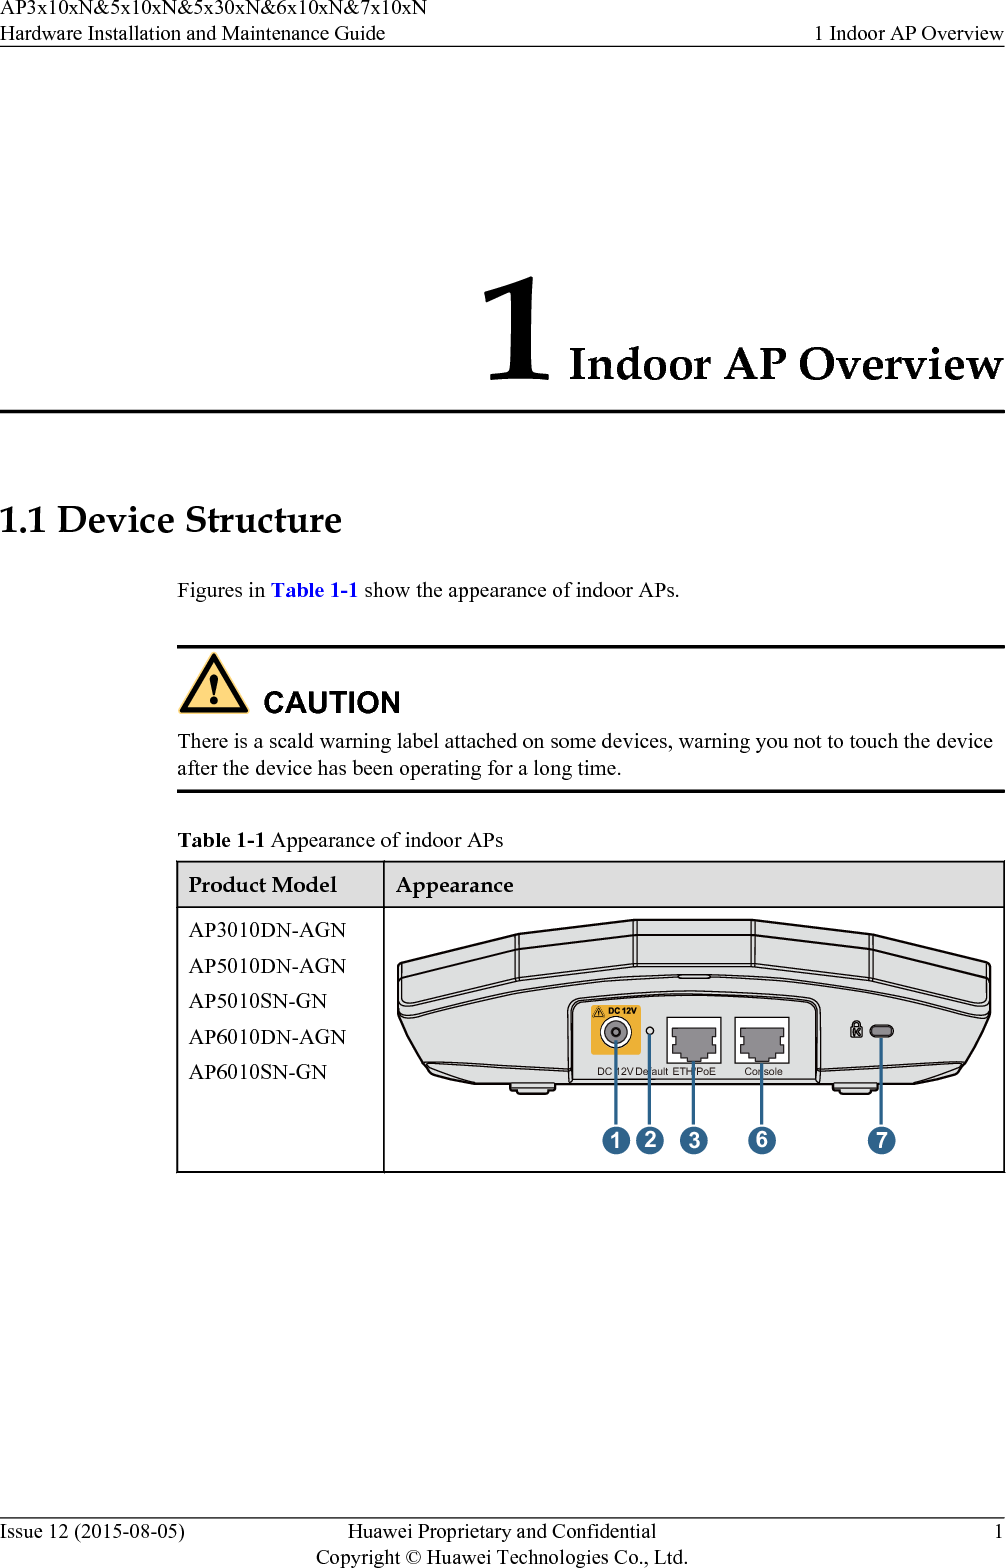 1 Indoor AP Overview1.1 Device StructureFigures in Table 1-1 show the appearance of indoor APs.CAUTIONThere is a scald warning label attached on some devices, warning you not to touch the deviceafter the device has been operating for a long time.Table 1-1 Appearance of indoor APsProduct Model AppearanceAP3010DN-AGNAP5010DN-AGNAP5010SN-GNAP6010DN-AGNAP6010SN-GN12367ConsoleETH/PoEDefaultDC 12VAP3x10xN&amp;5x10xN&amp;5x30xN&amp;6x10xN&amp;7x10xNHardware Installation and Maintenance Guide 1 Indoor AP OverviewIssue 12 (2015-08-05) Huawei Proprietary and ConfidentialCopyright © Huawei Technologies Co., Ltd.1